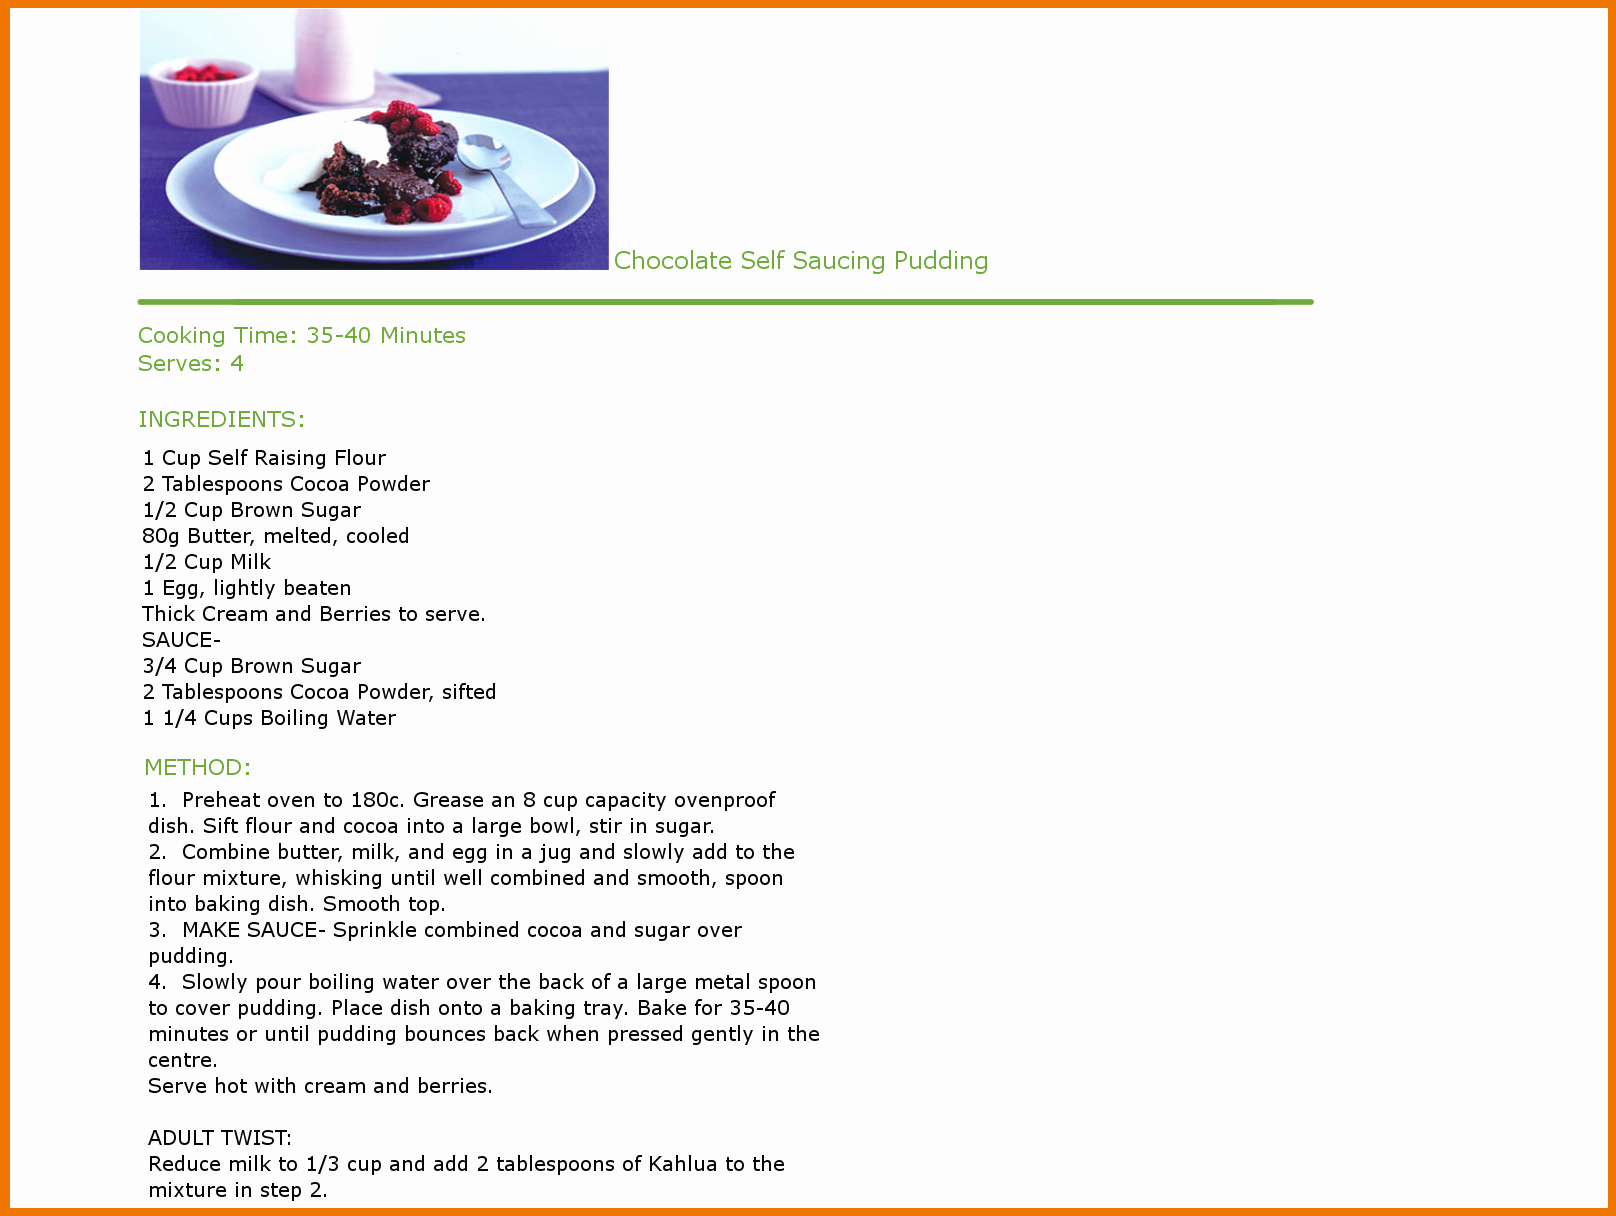 Free Recipe Card Templates for Microsoft Word